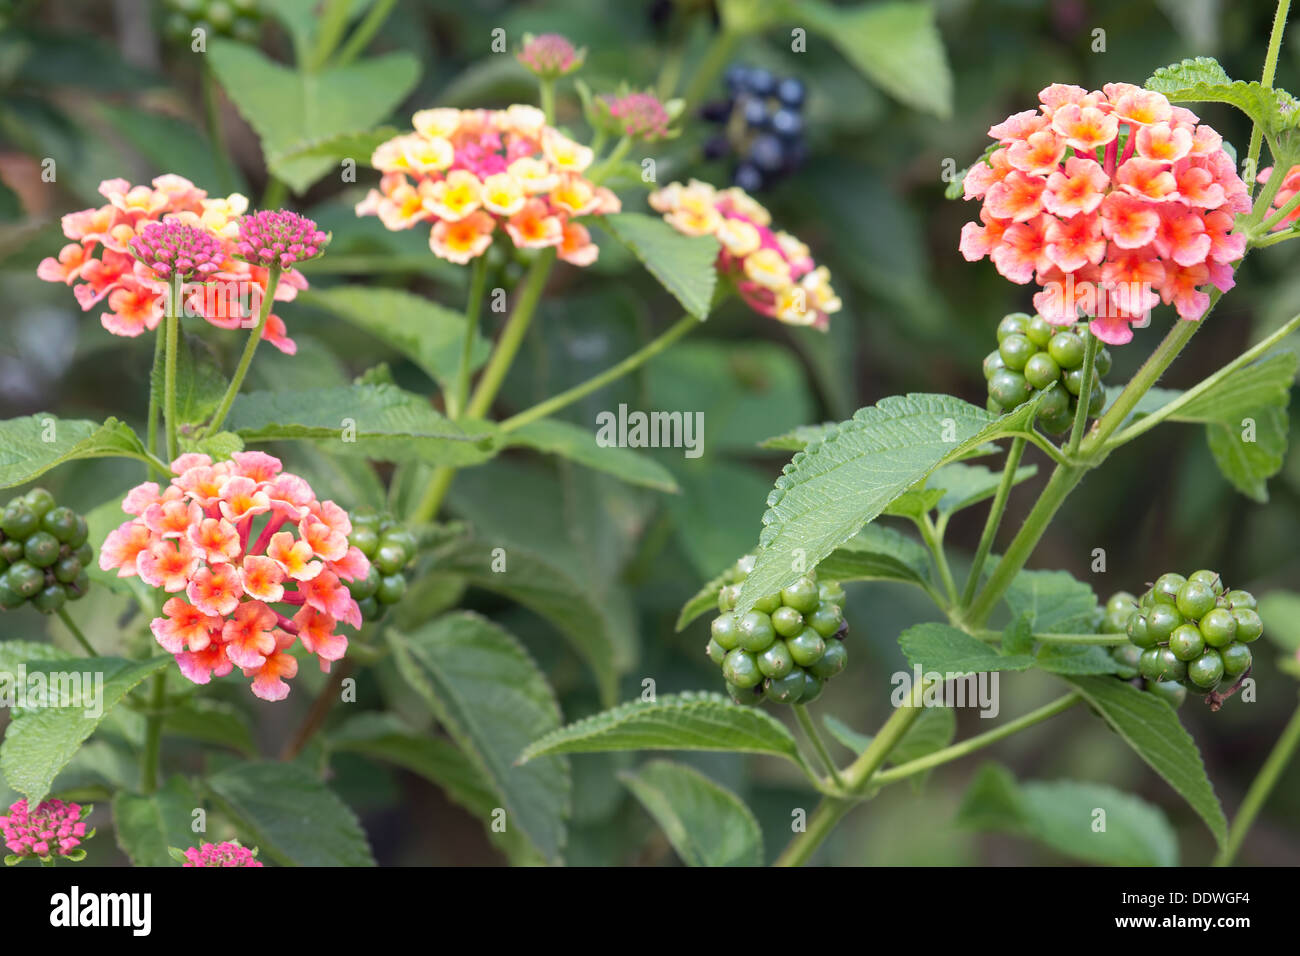 Lantana Flowers And Berries Bushes In Garden Stock Photo Alamy